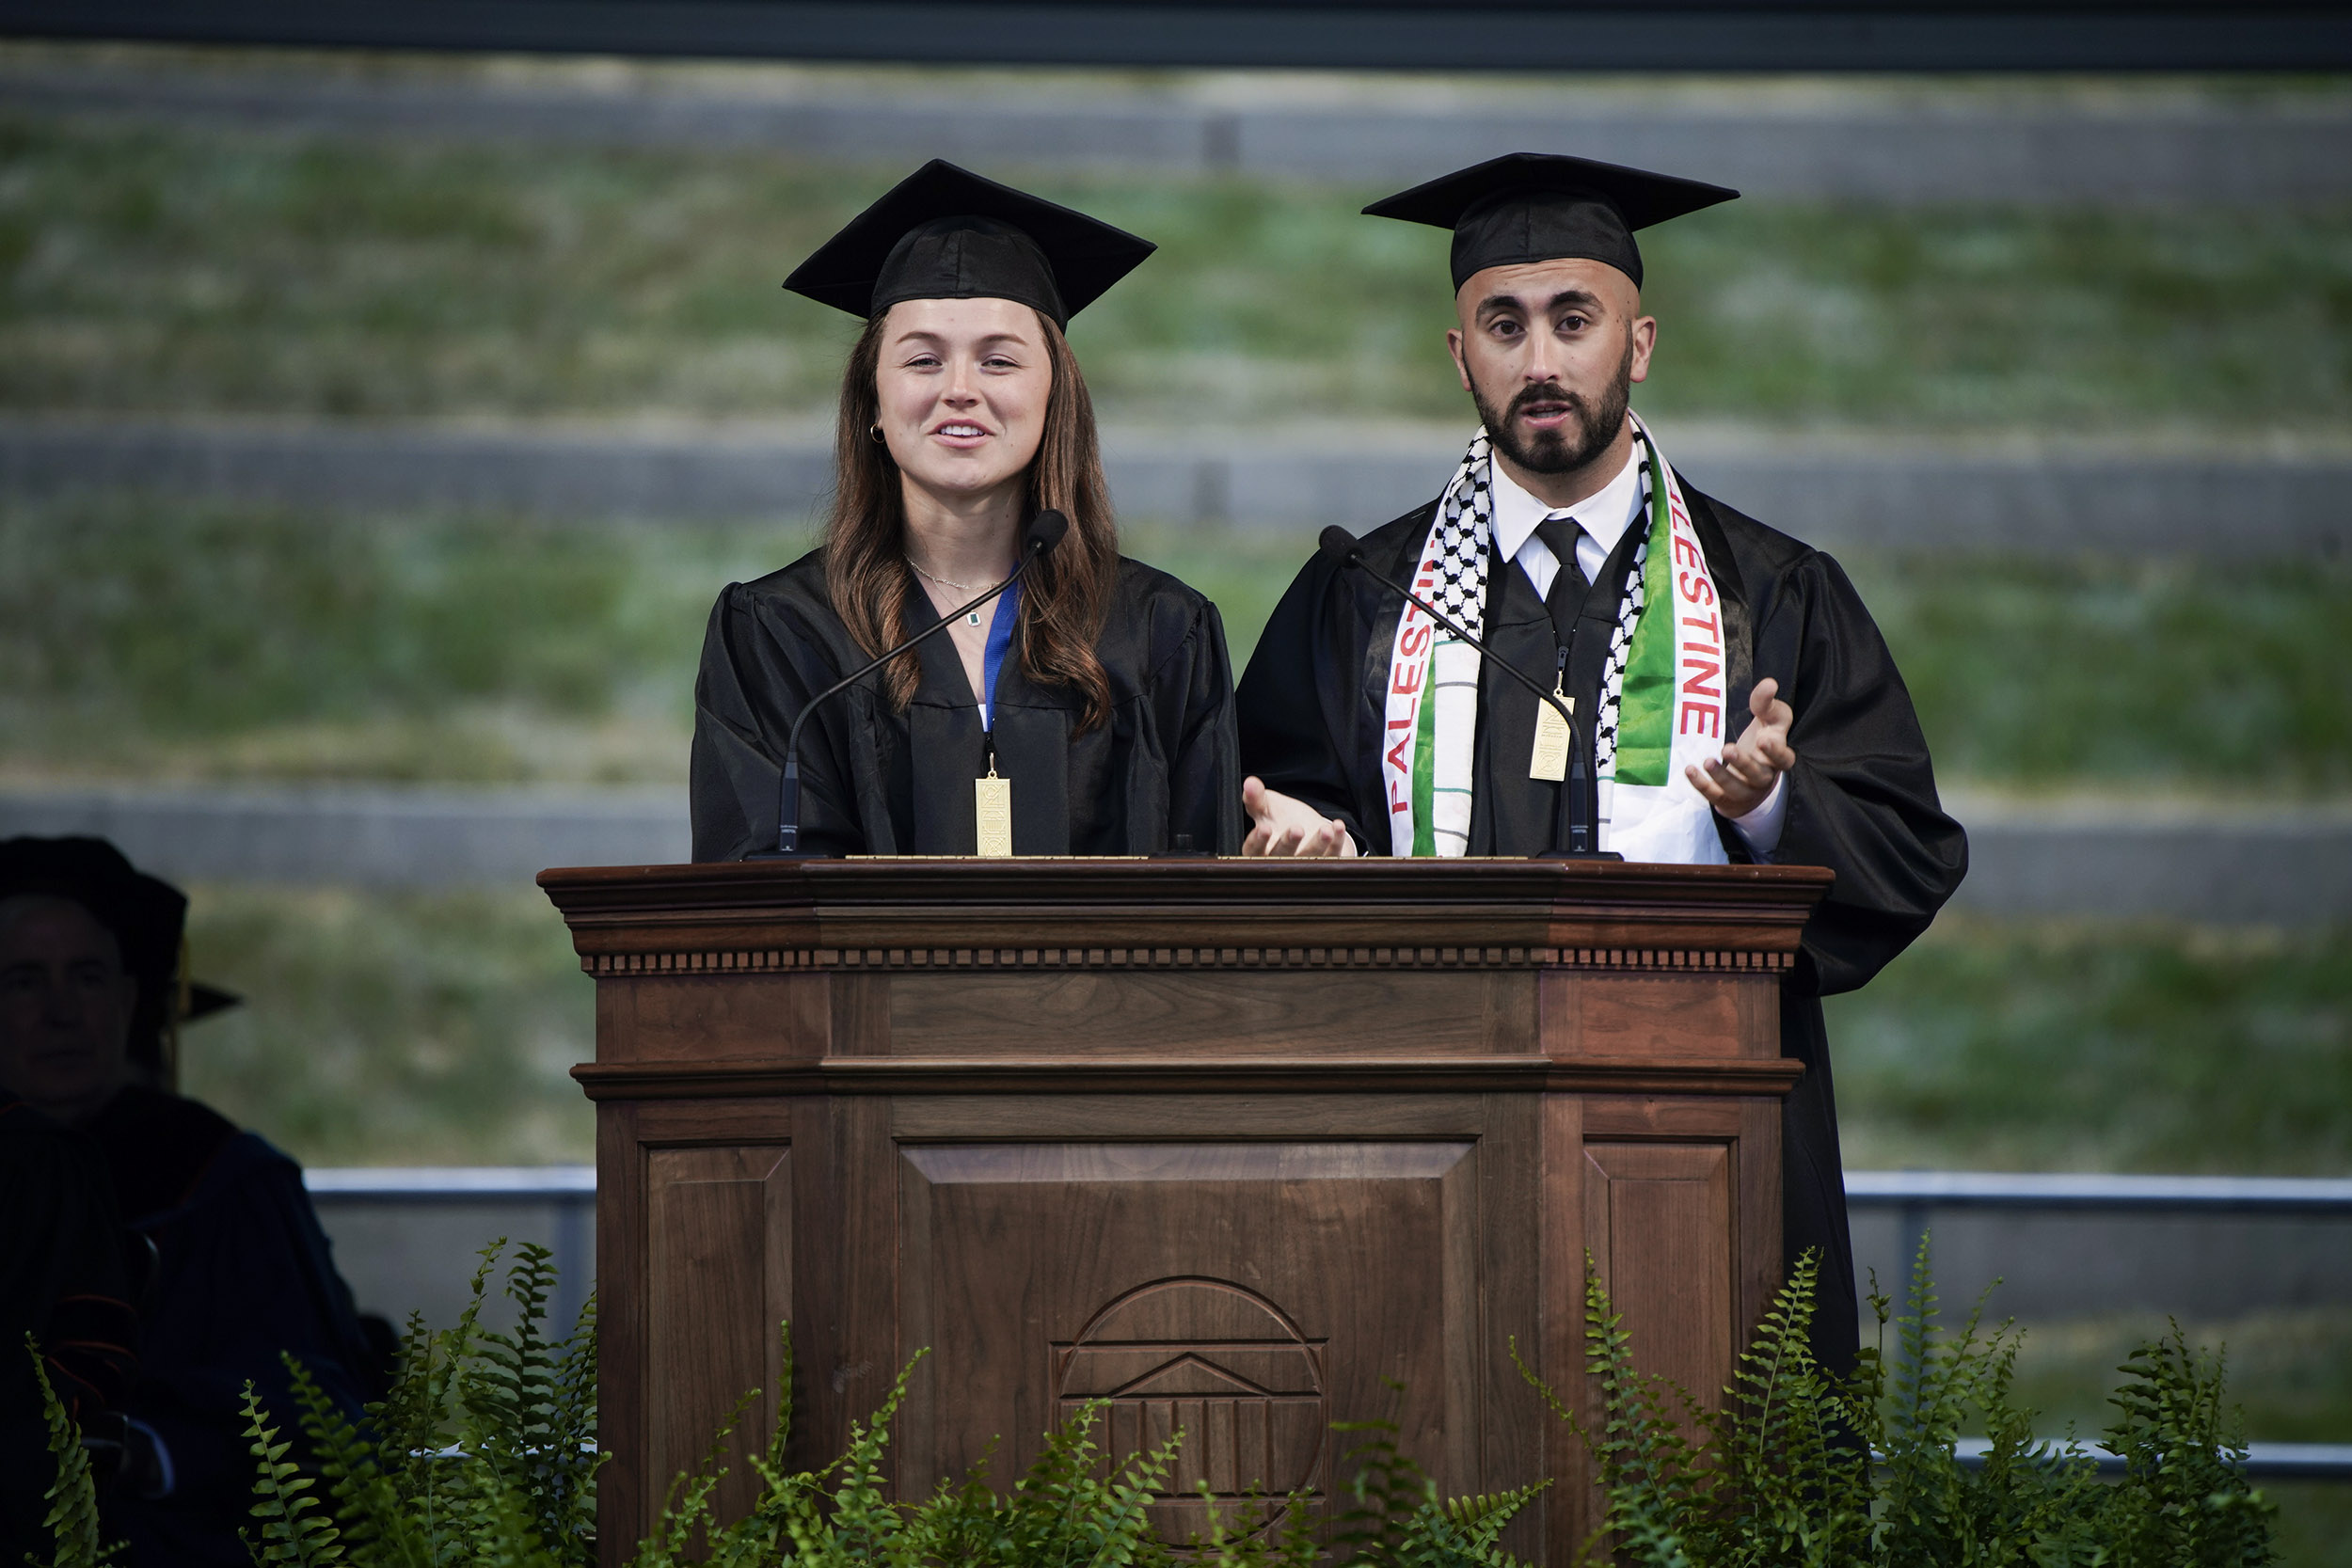 Omar Elhaj, right, and Ginny Brooks, left, stand at the podium giving a speech together